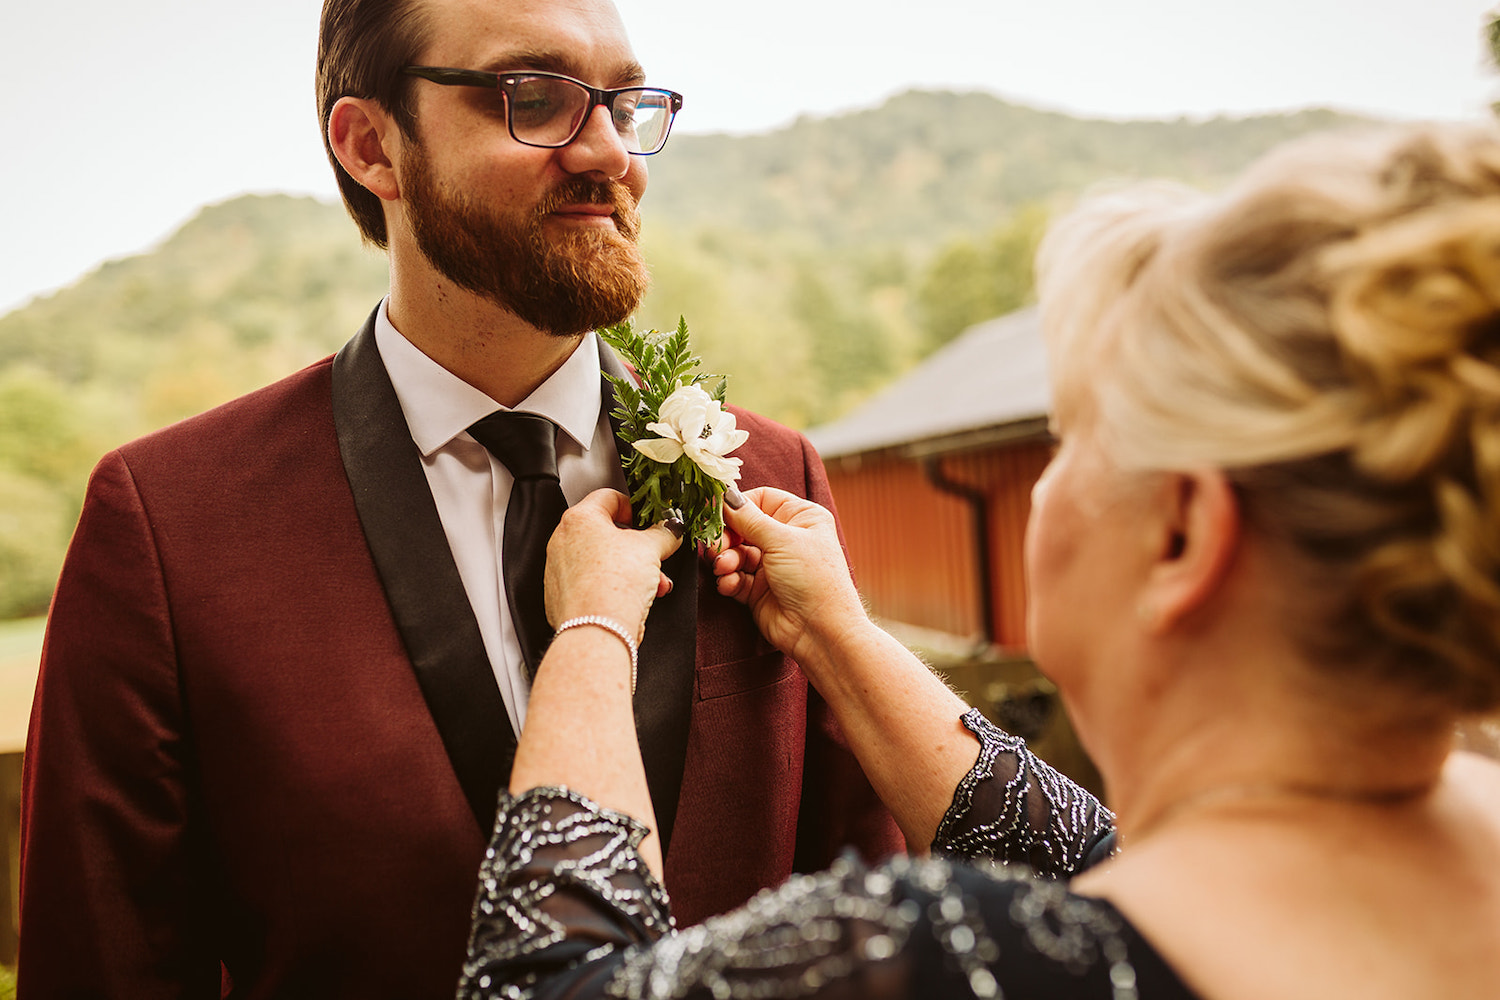 groom's mother pins a simple boutonniere of greens and white flower onto the black lapel of his maroon suit